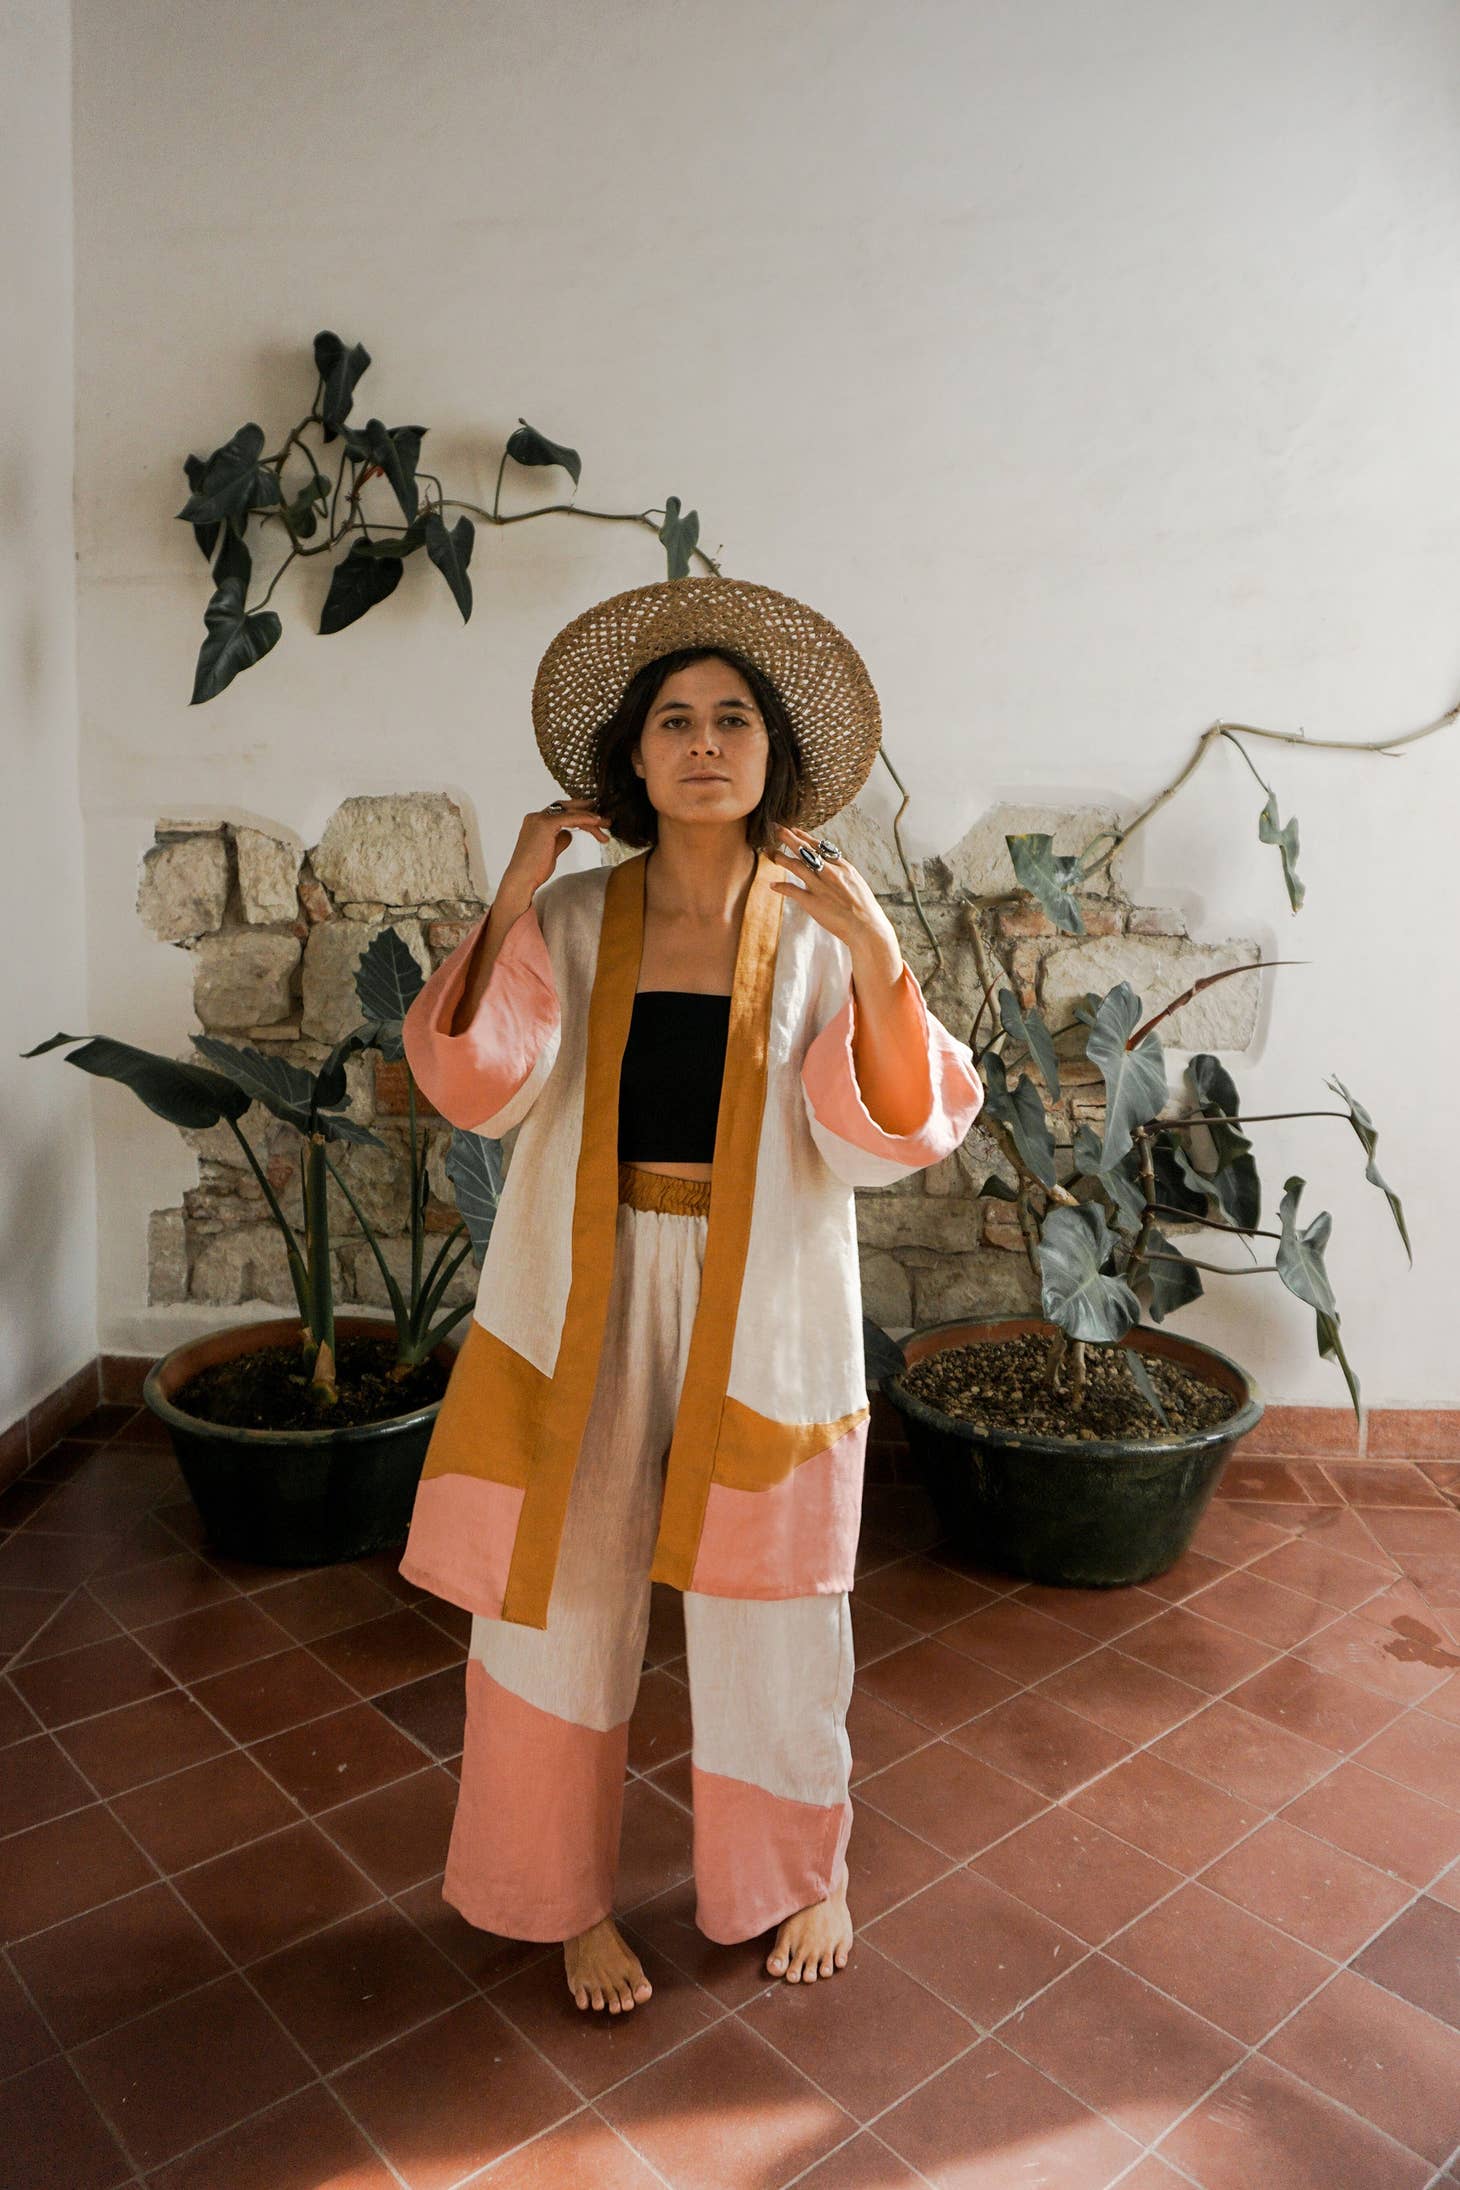 Complete your work from home look, dress up your coffee run, or throw it over your shoulders for a romantic sunset stroll. Made from soft, breathable stonewashed linen. Artwork is designed by local artist Kelsey Van Patten and handmade in Mexico.